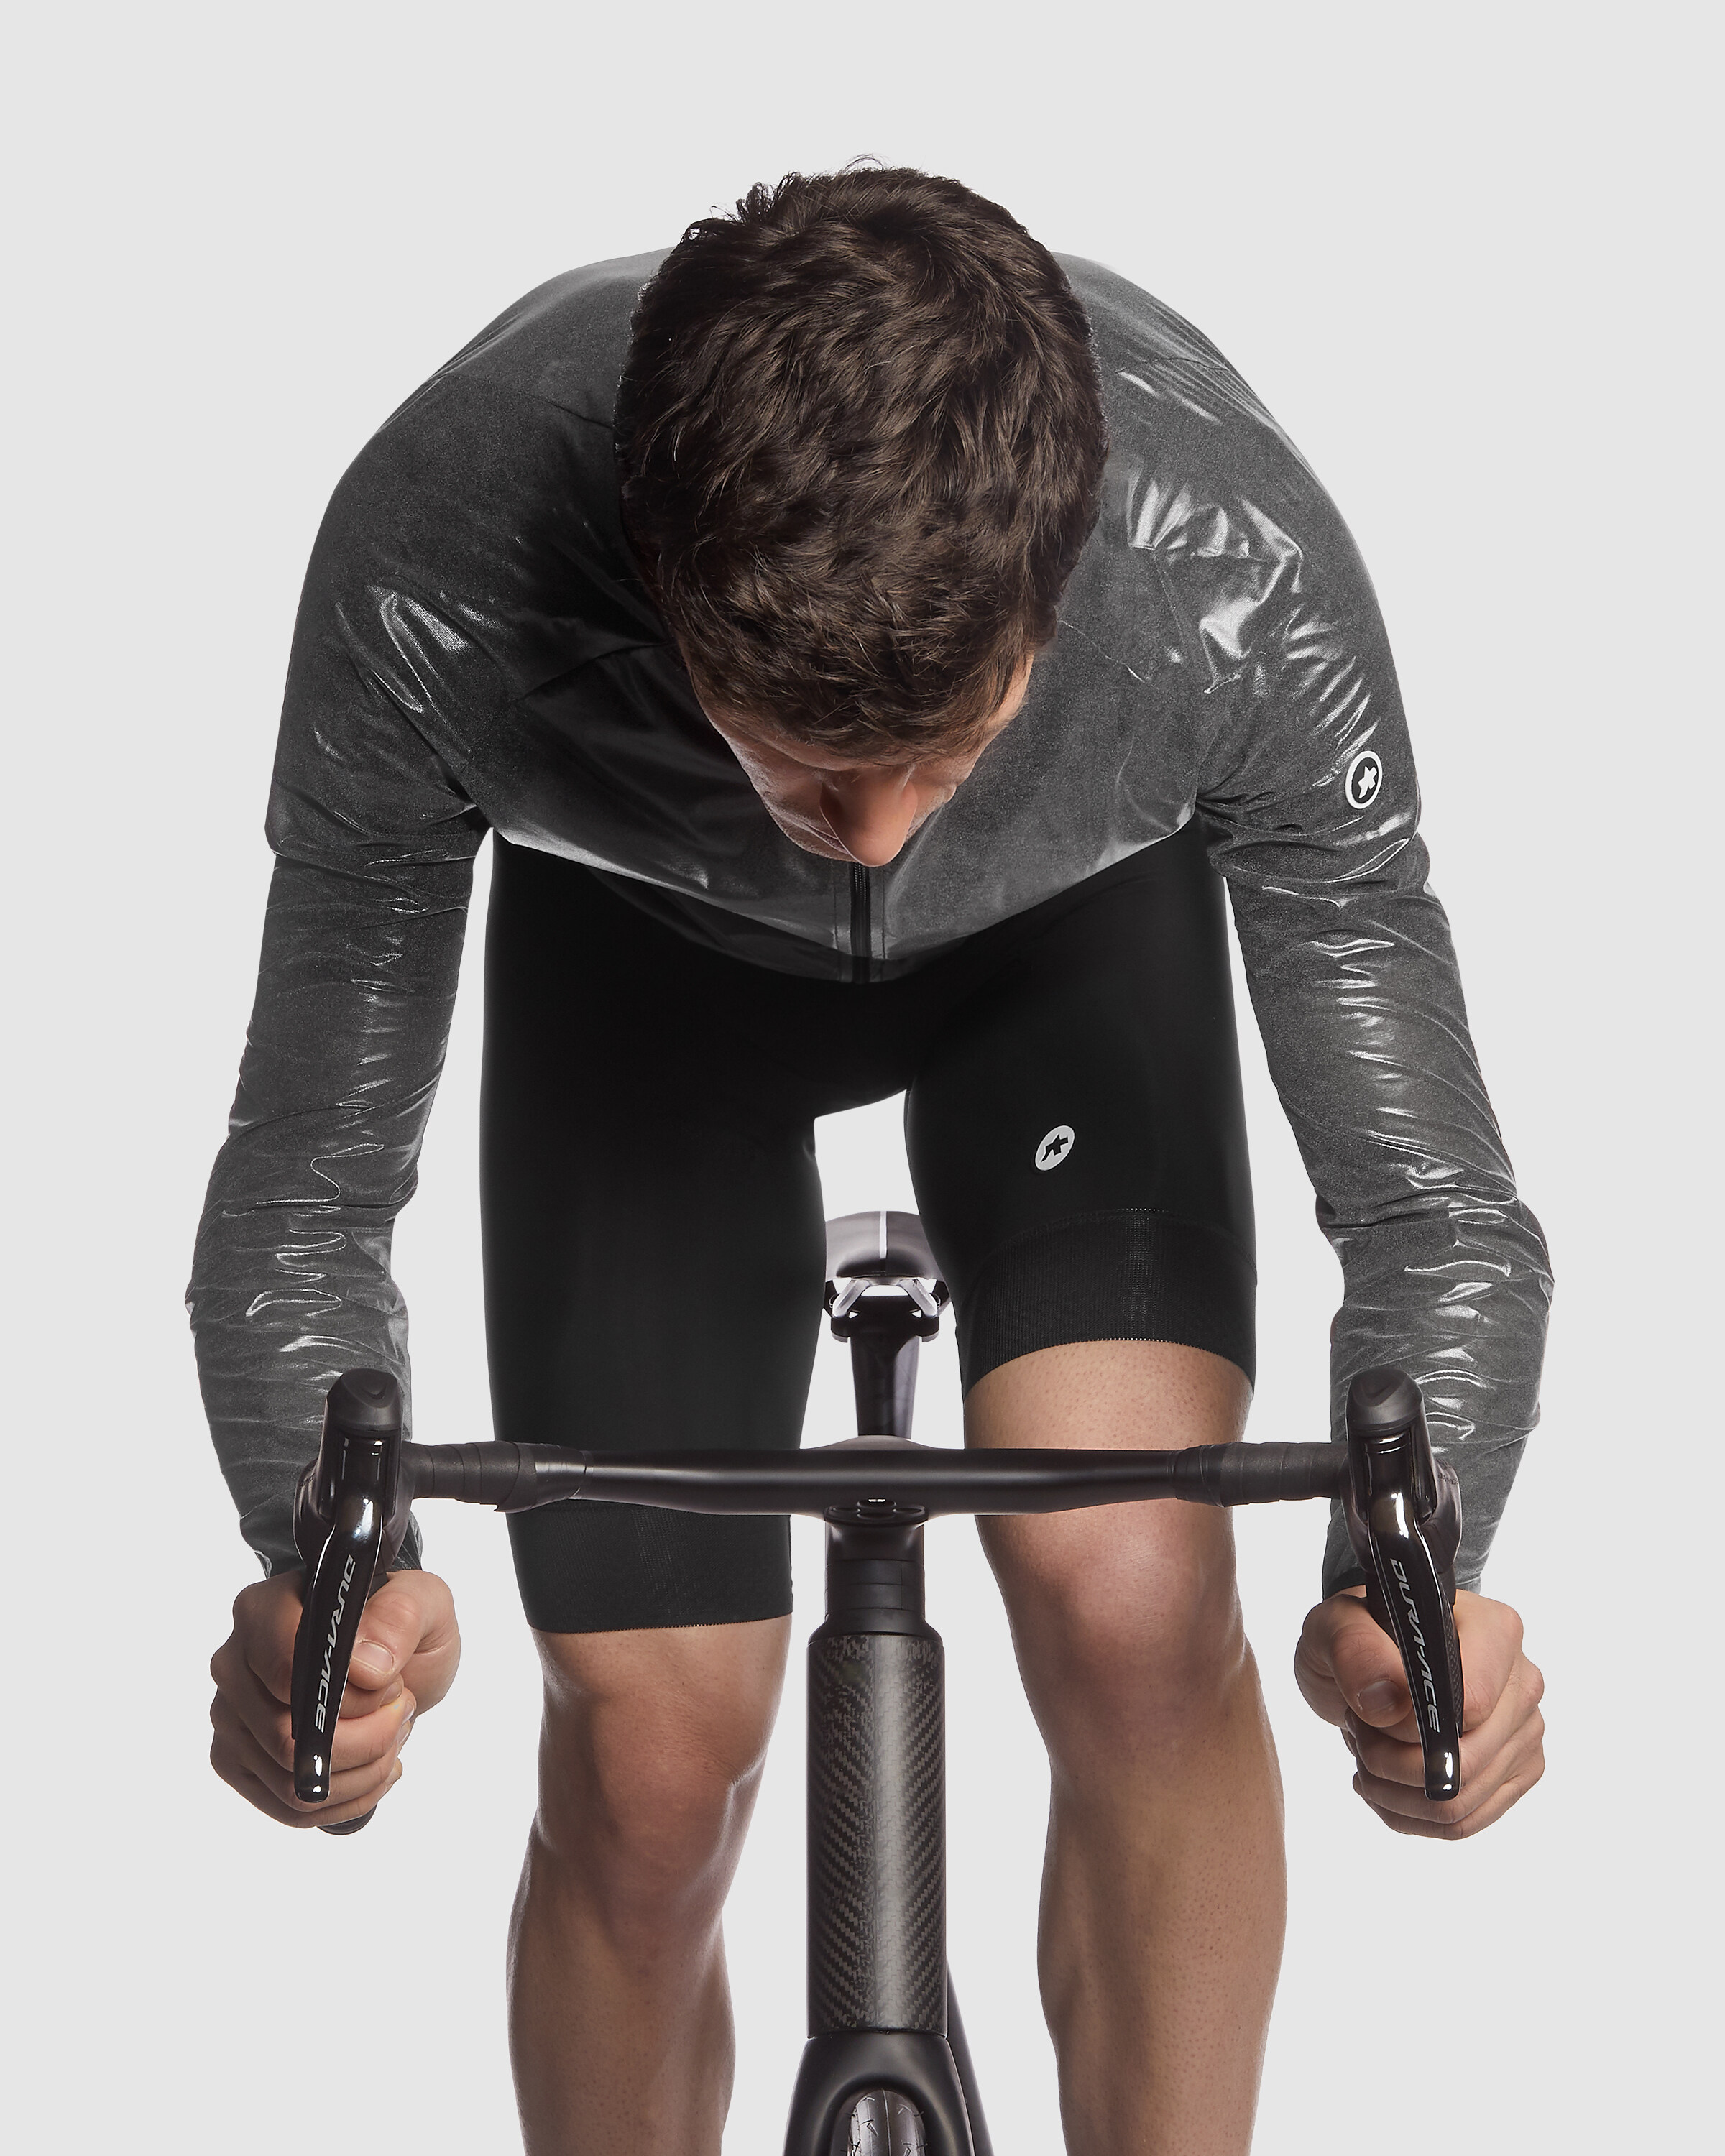 MILLE GT Clima Jacket EVO - ASSOS Of Switzerland - Official Outlet